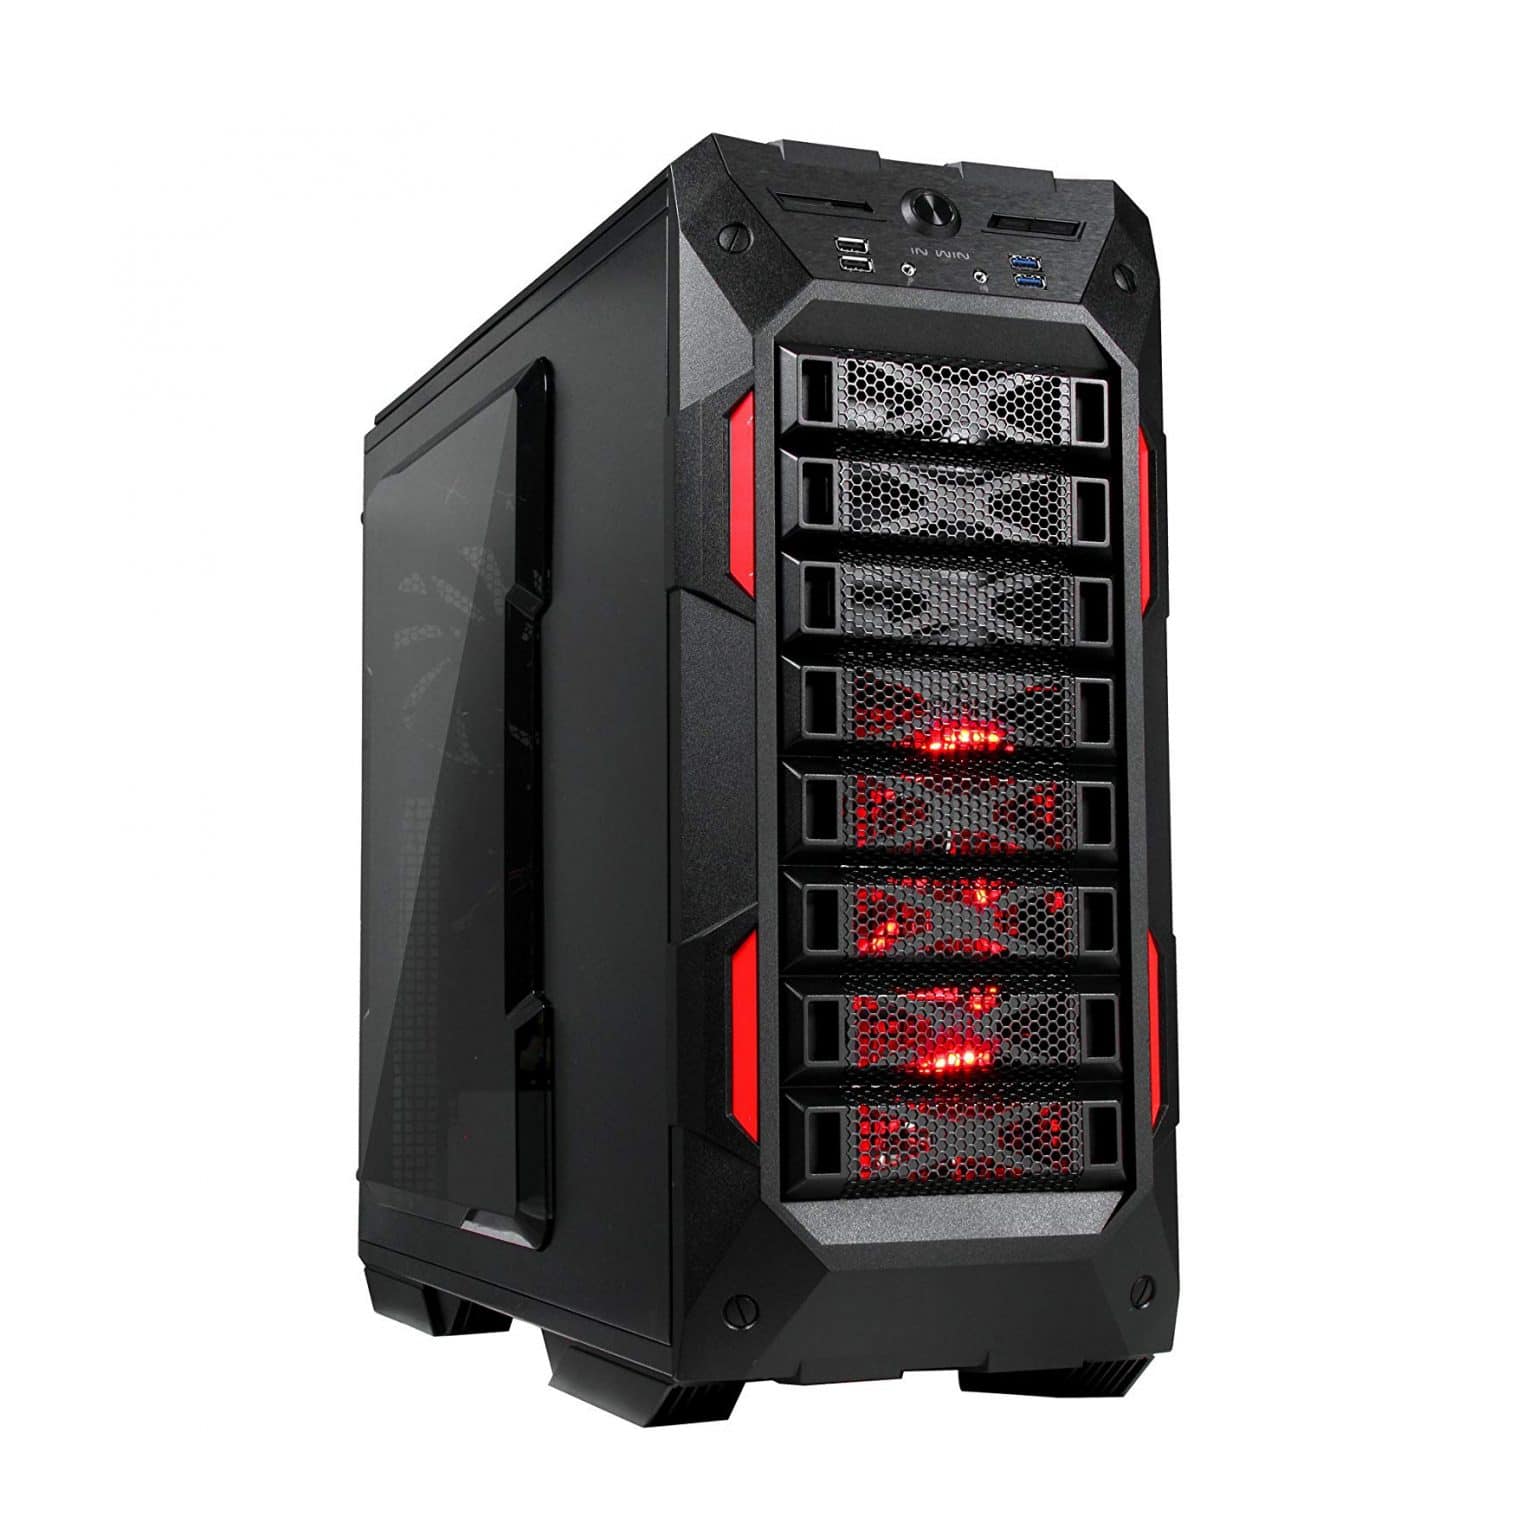 Top 10 Best Full Tower PC Cases in 2021 Reviews Buyer’s Guide